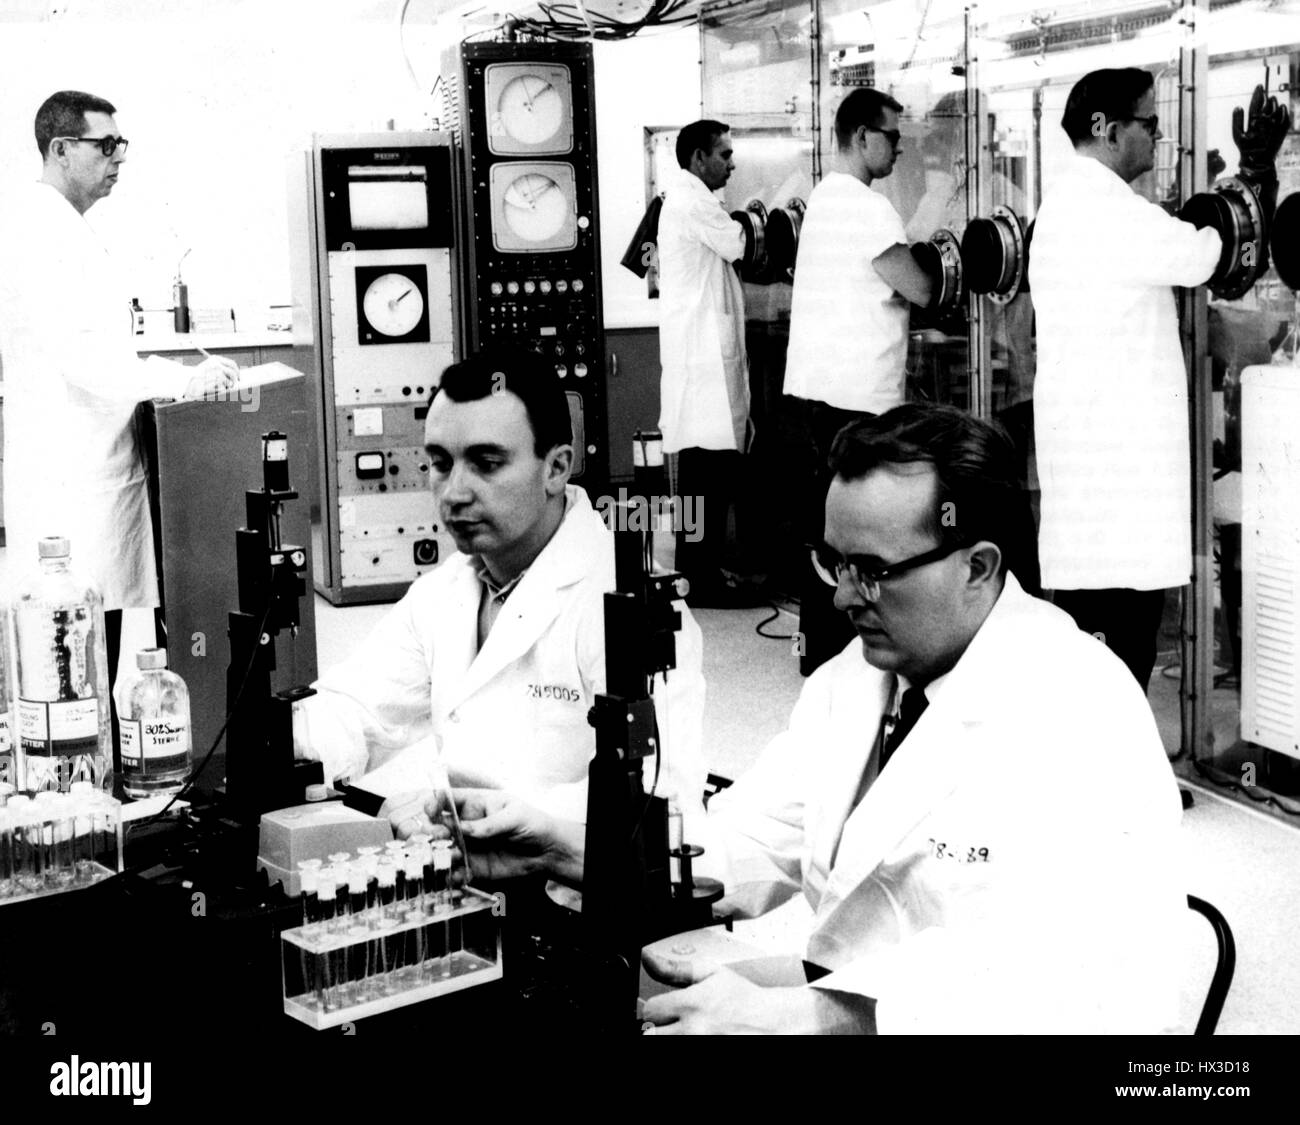 Staff members of the Biophysical Separation Laboratory examine the equipment in the virus isolation facility at Oak Ridge National Laboratory, Oak Ridge, Tennessee, 1965. Image courtesy US Department of Energy. Stock Photo